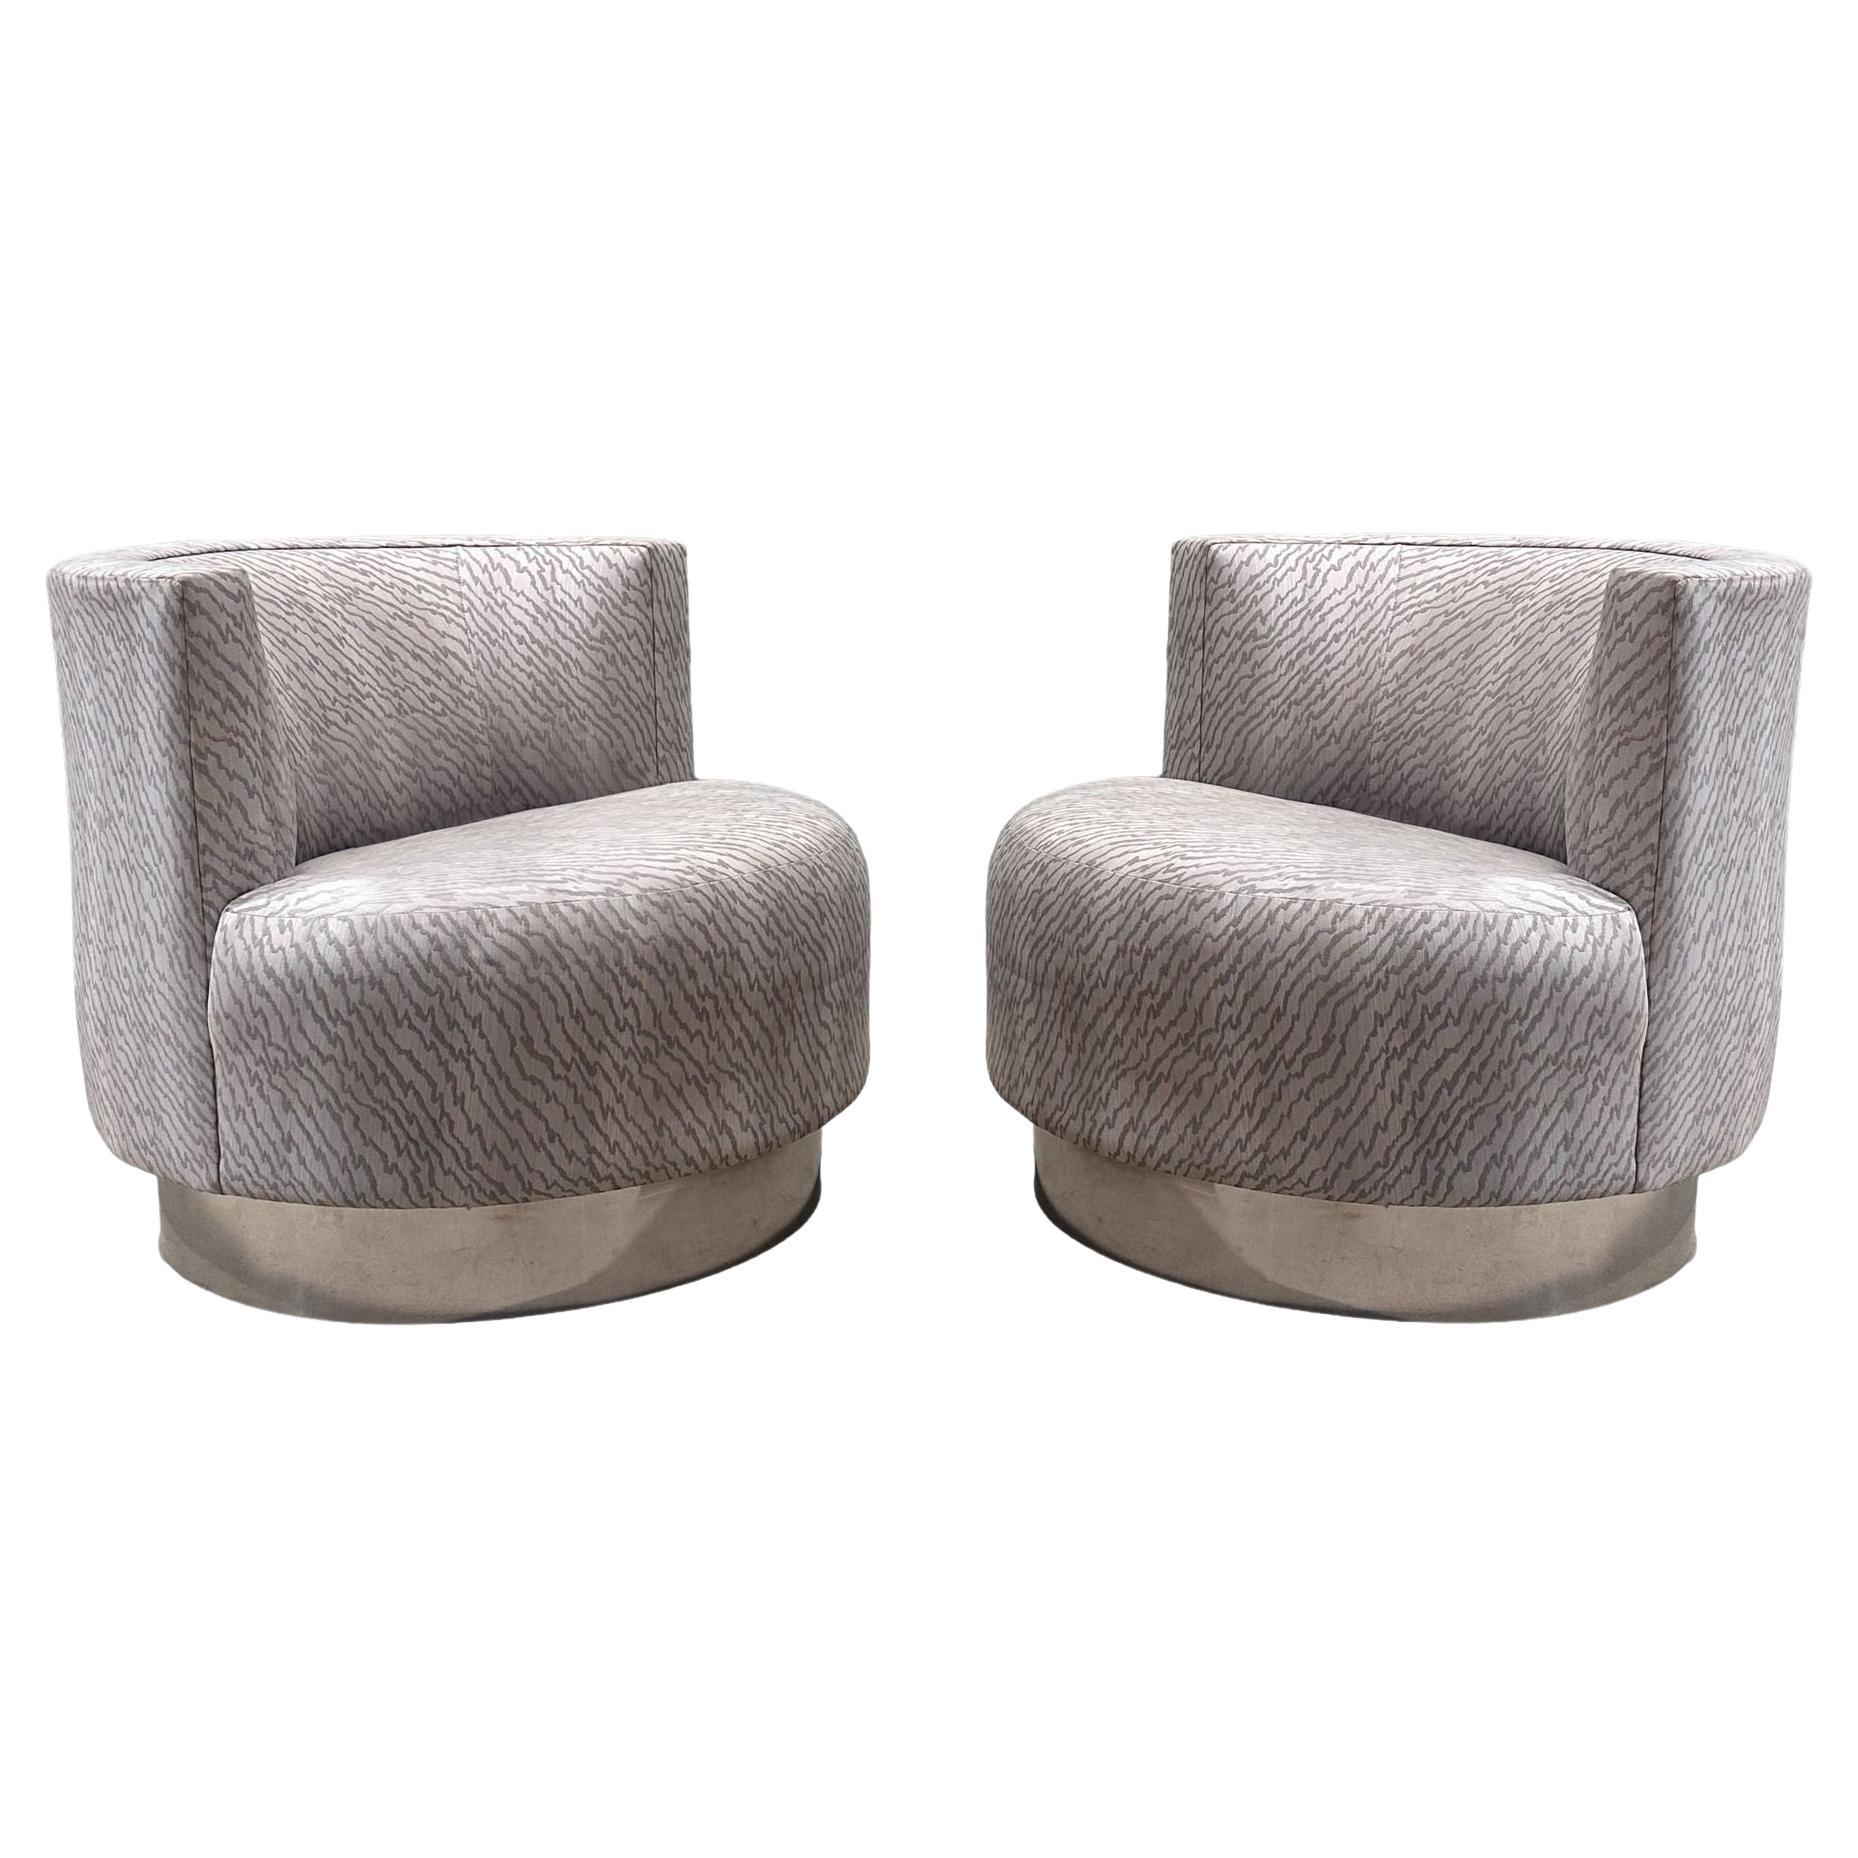 Pair of "Mala" Style Swivel Chairs, after Franco Fraschini, 1970 For Sale